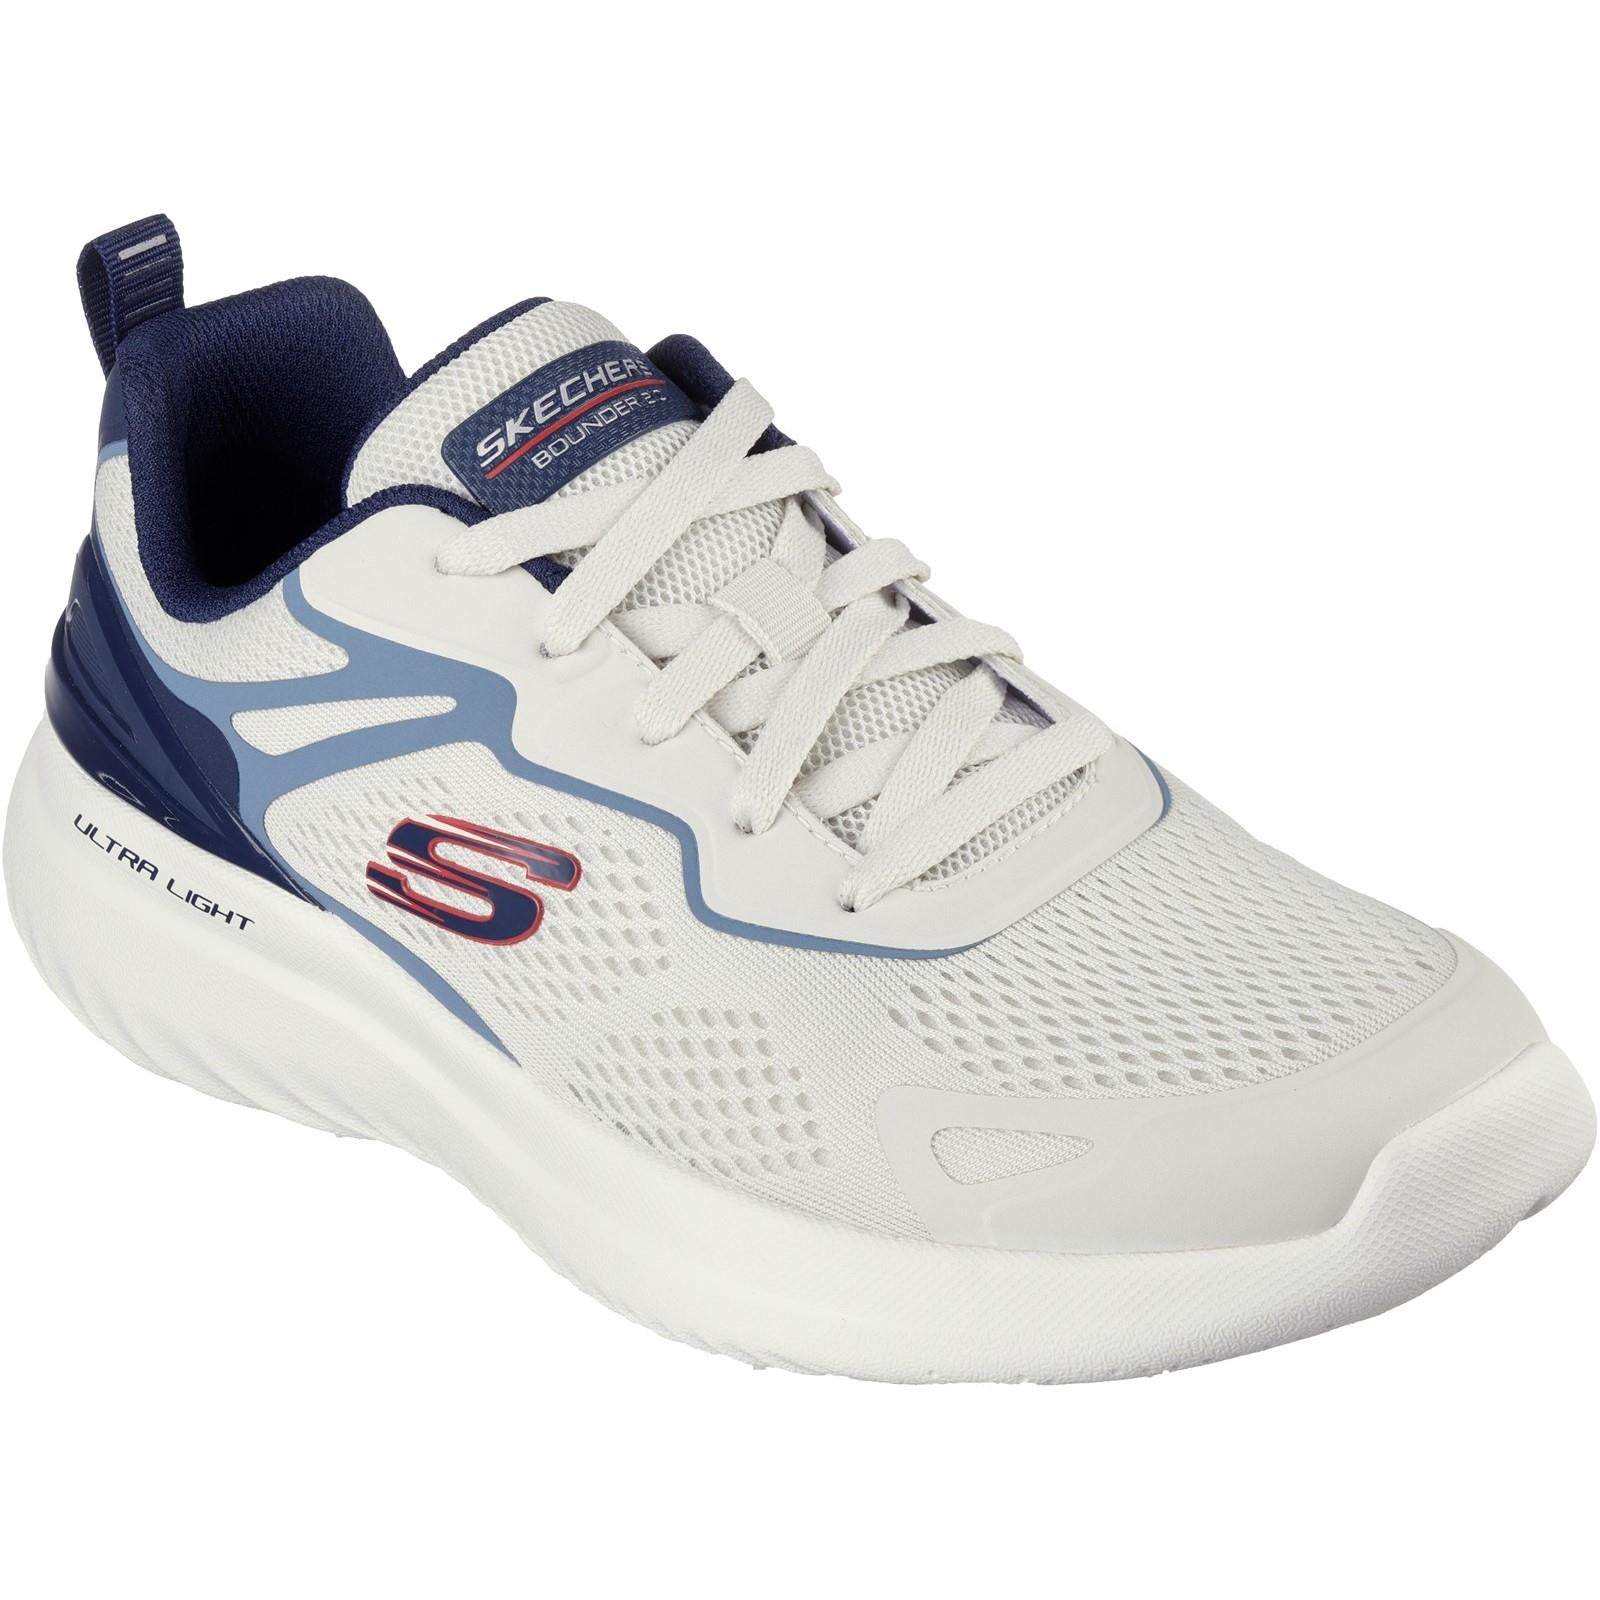 Skechers Bounder 2.0 Andal white/navy memory foam sports gym trainers shoes